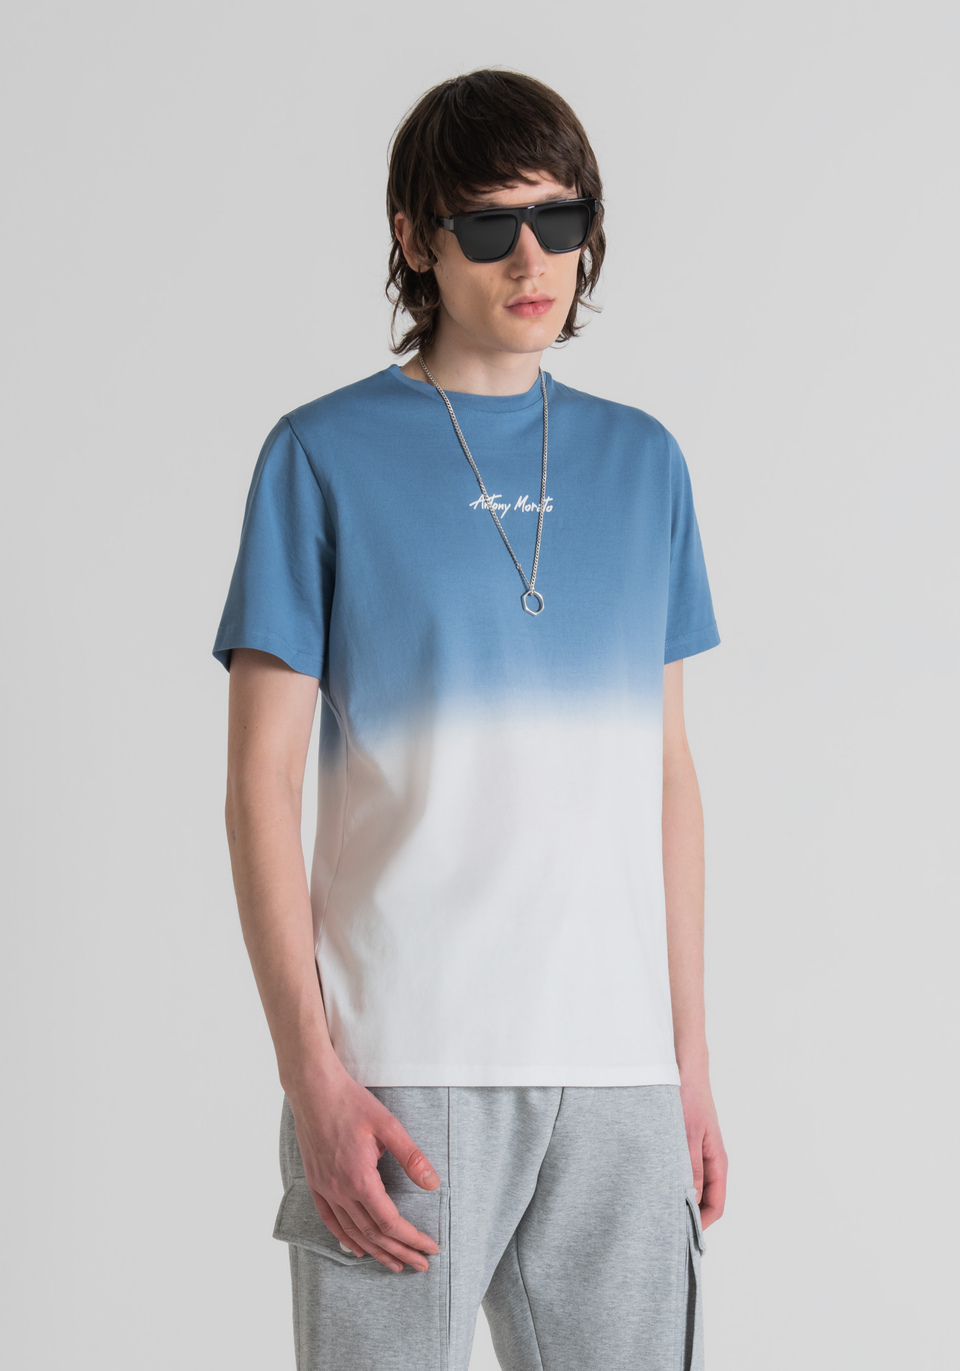 REGULAR-FIT T-SHIRT IN PURE COTTON WITH TIE-DYE EFFECT - Antony Morato Online Shop